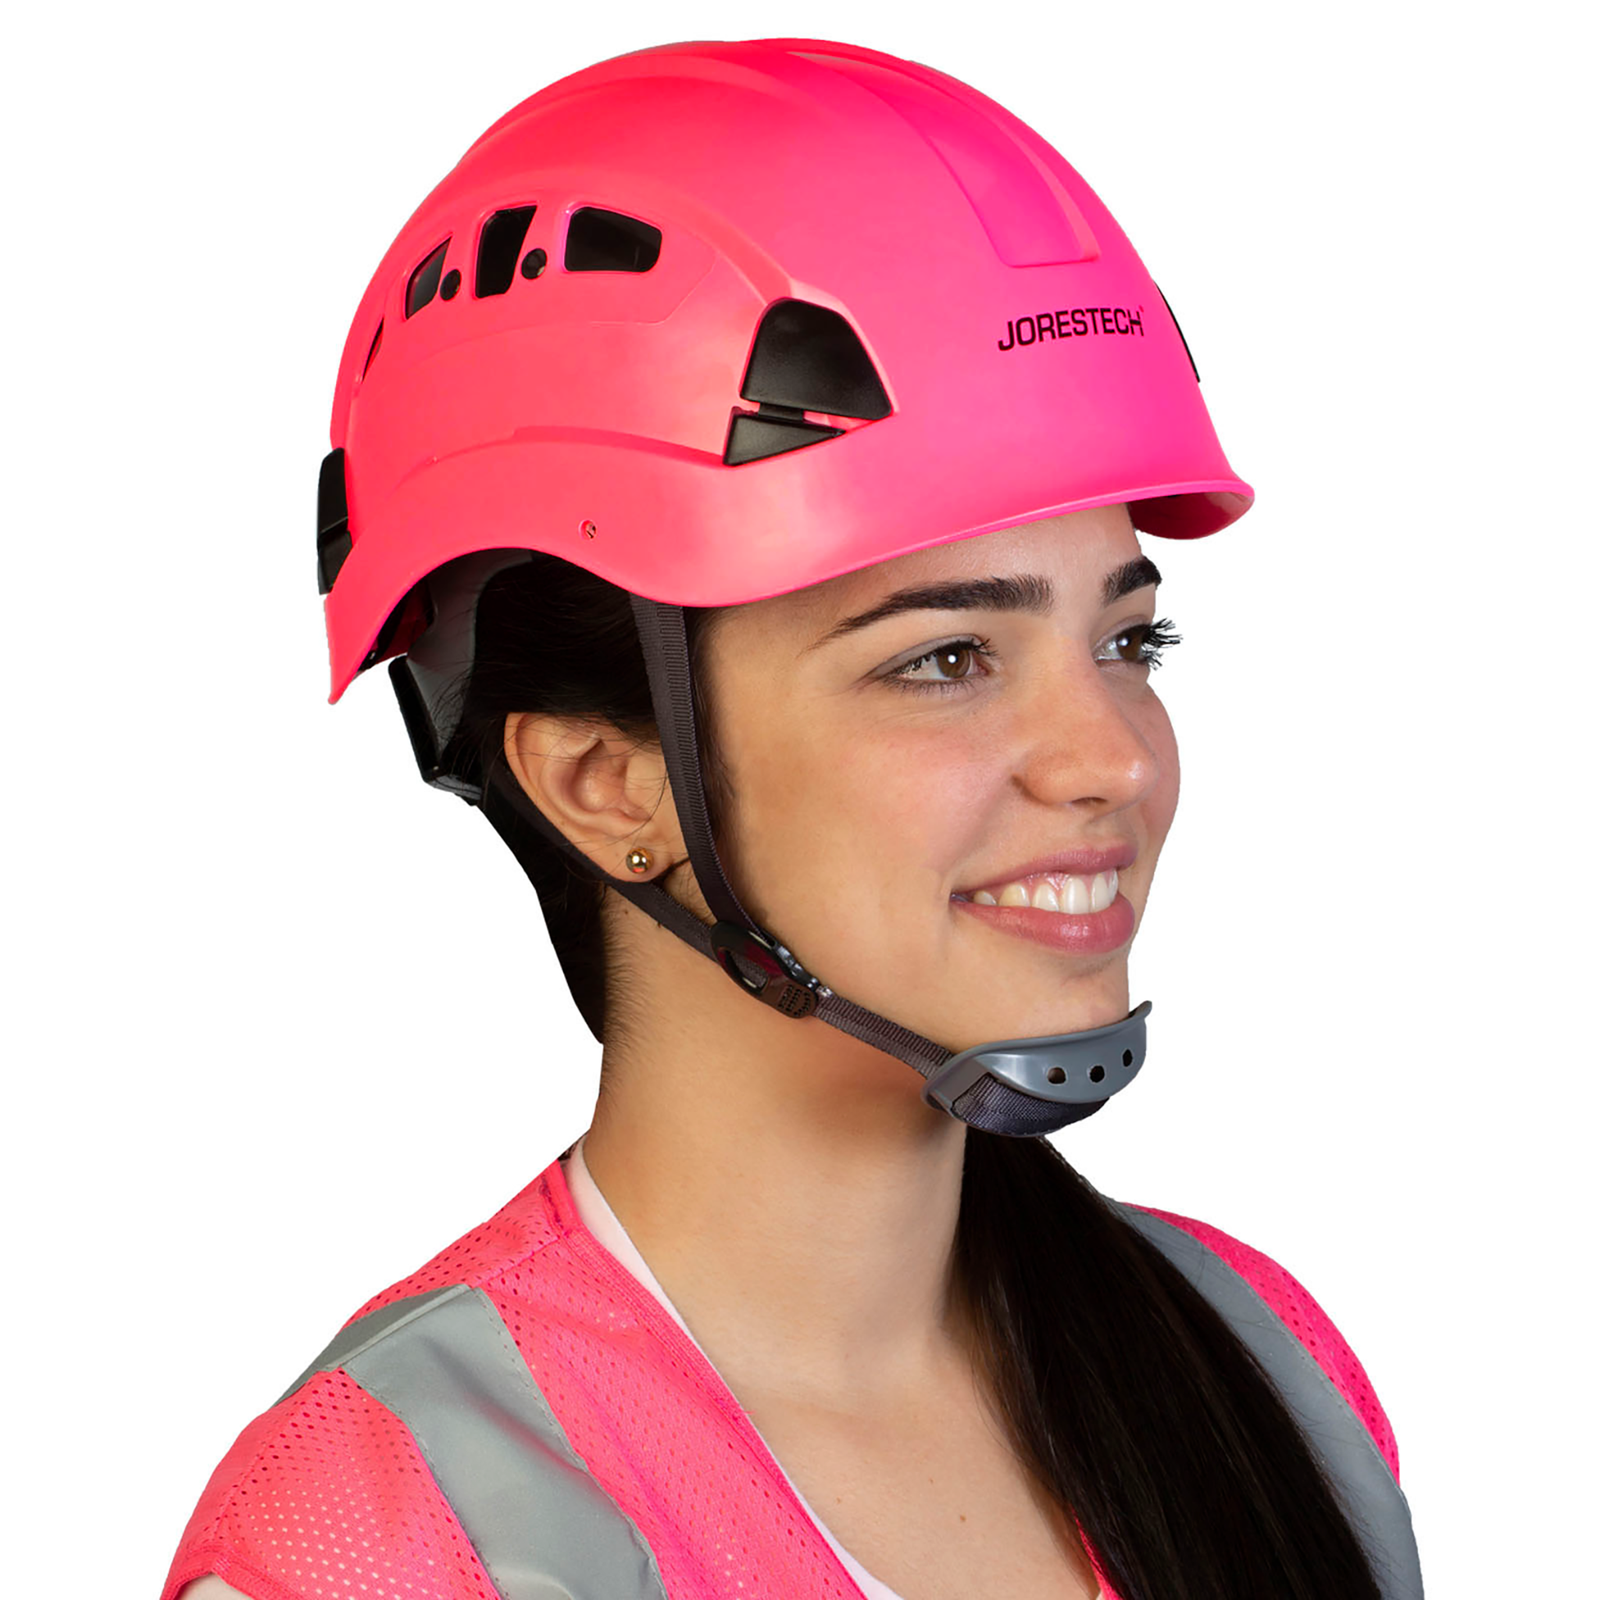 A woman wearing the Jorestech pink ventilated hard hat with adjustable 6 point suspension and chin strap